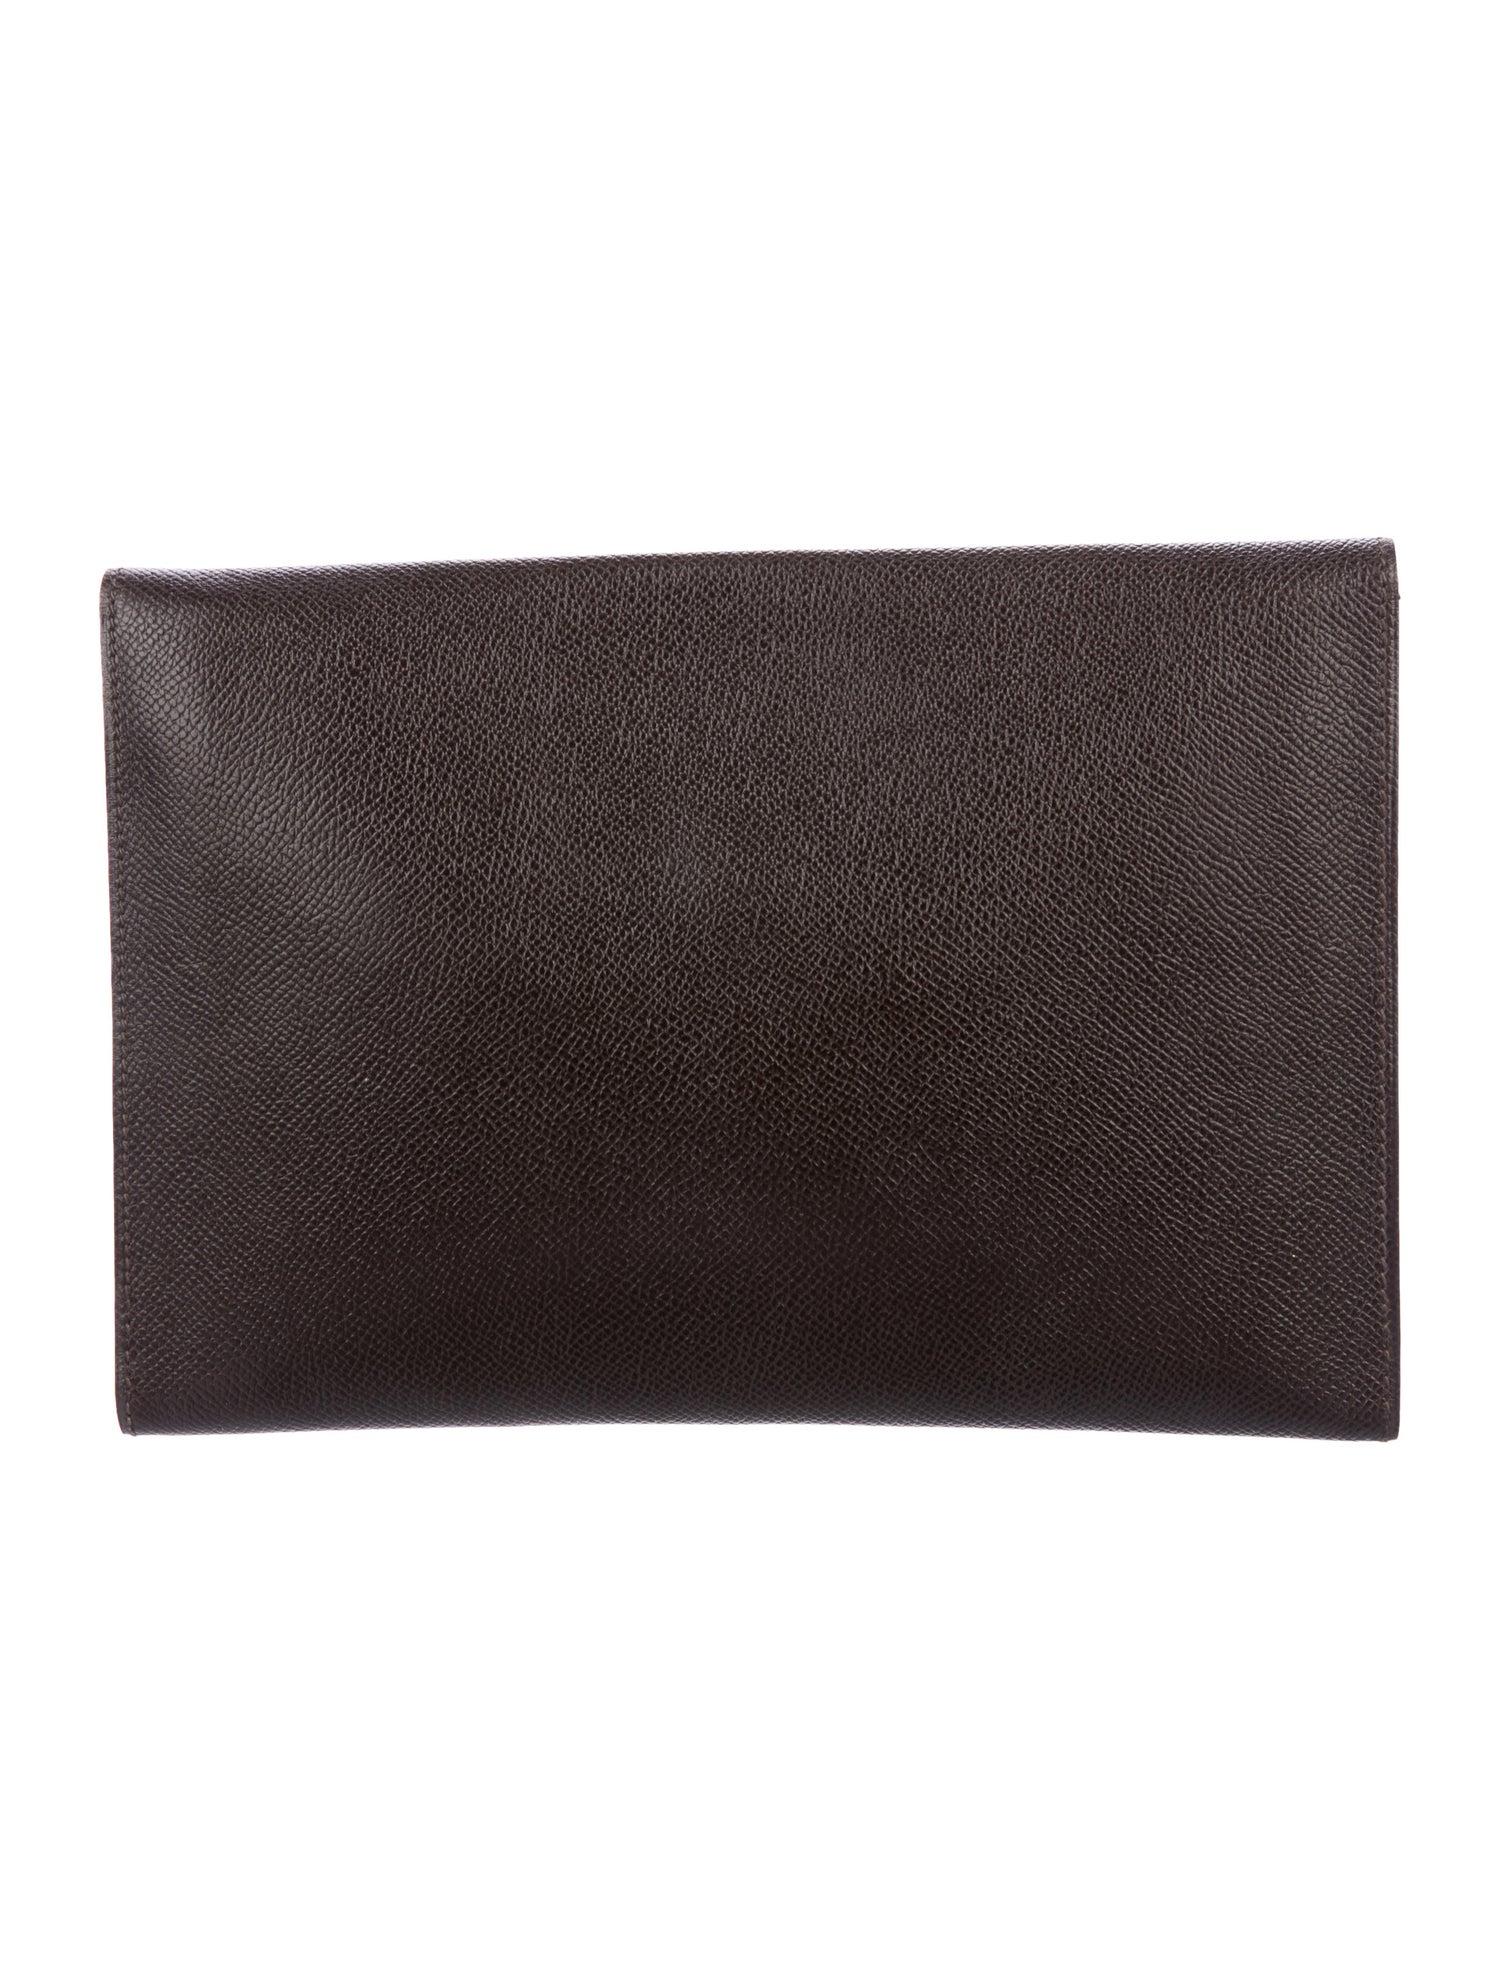 Hermes Dark Brown Leather Gold 'H' Logo Button Envelope Evening Clutch Bag

Leather
Gold tone hardware
Leather lining
Snap closure
Made in France
Measures 9.5